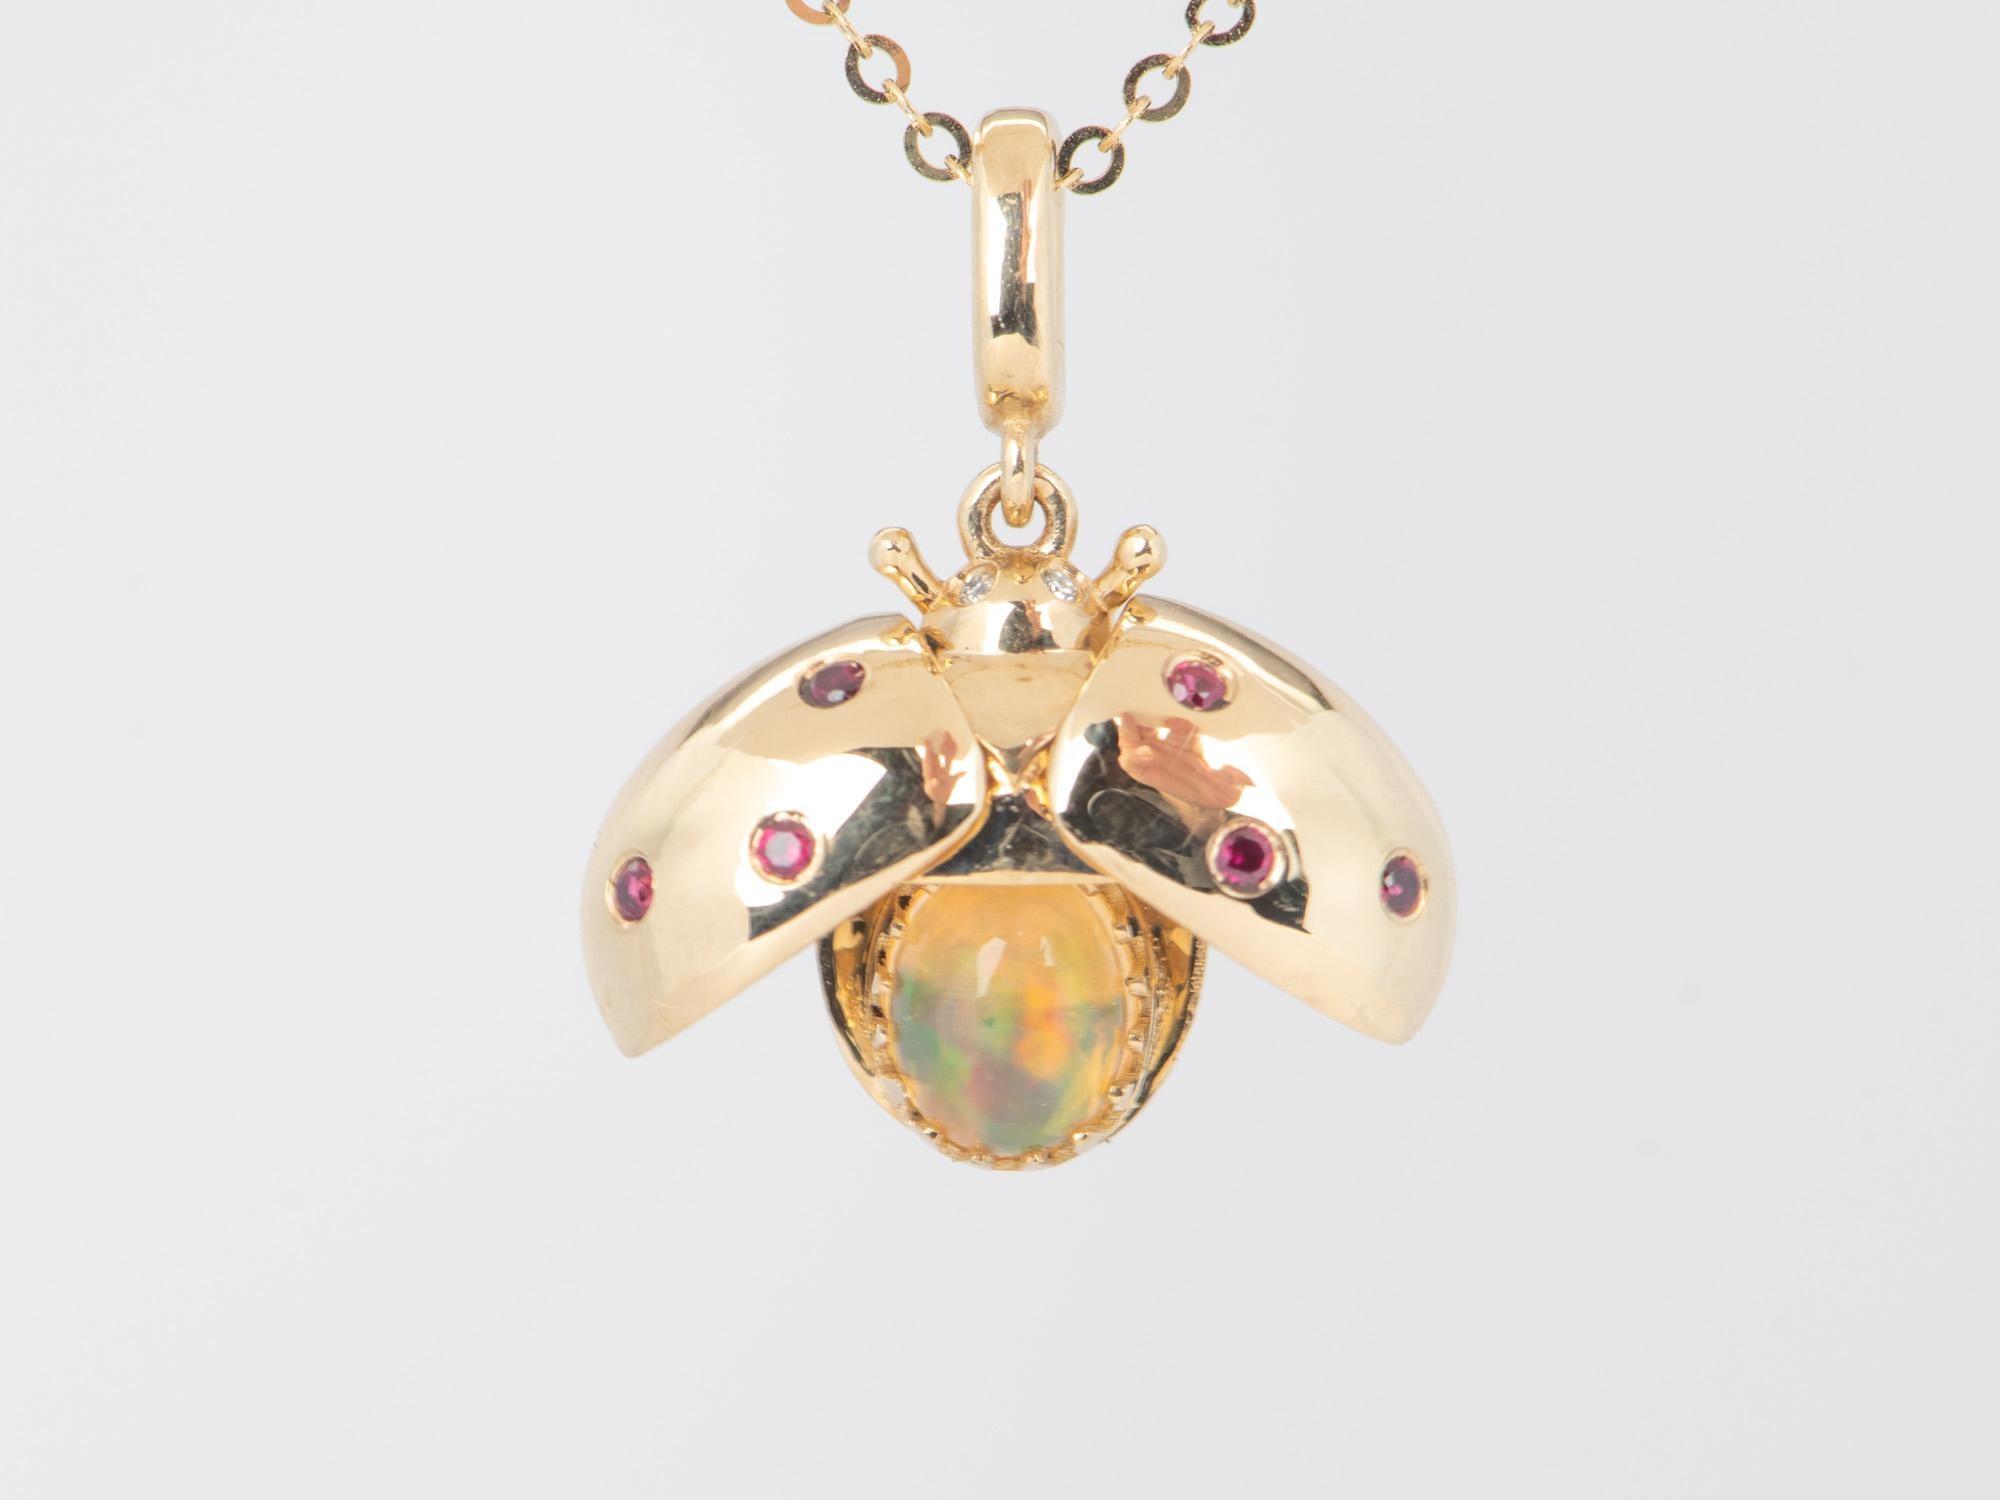 ♥ The cute ladybug has wings that can open to reveal a stunning Mexican fire opal full of rainbow flashes.
♥ The spots on the wings are made from rubies. The eyes are natural diamonds.
♥ The charm is 